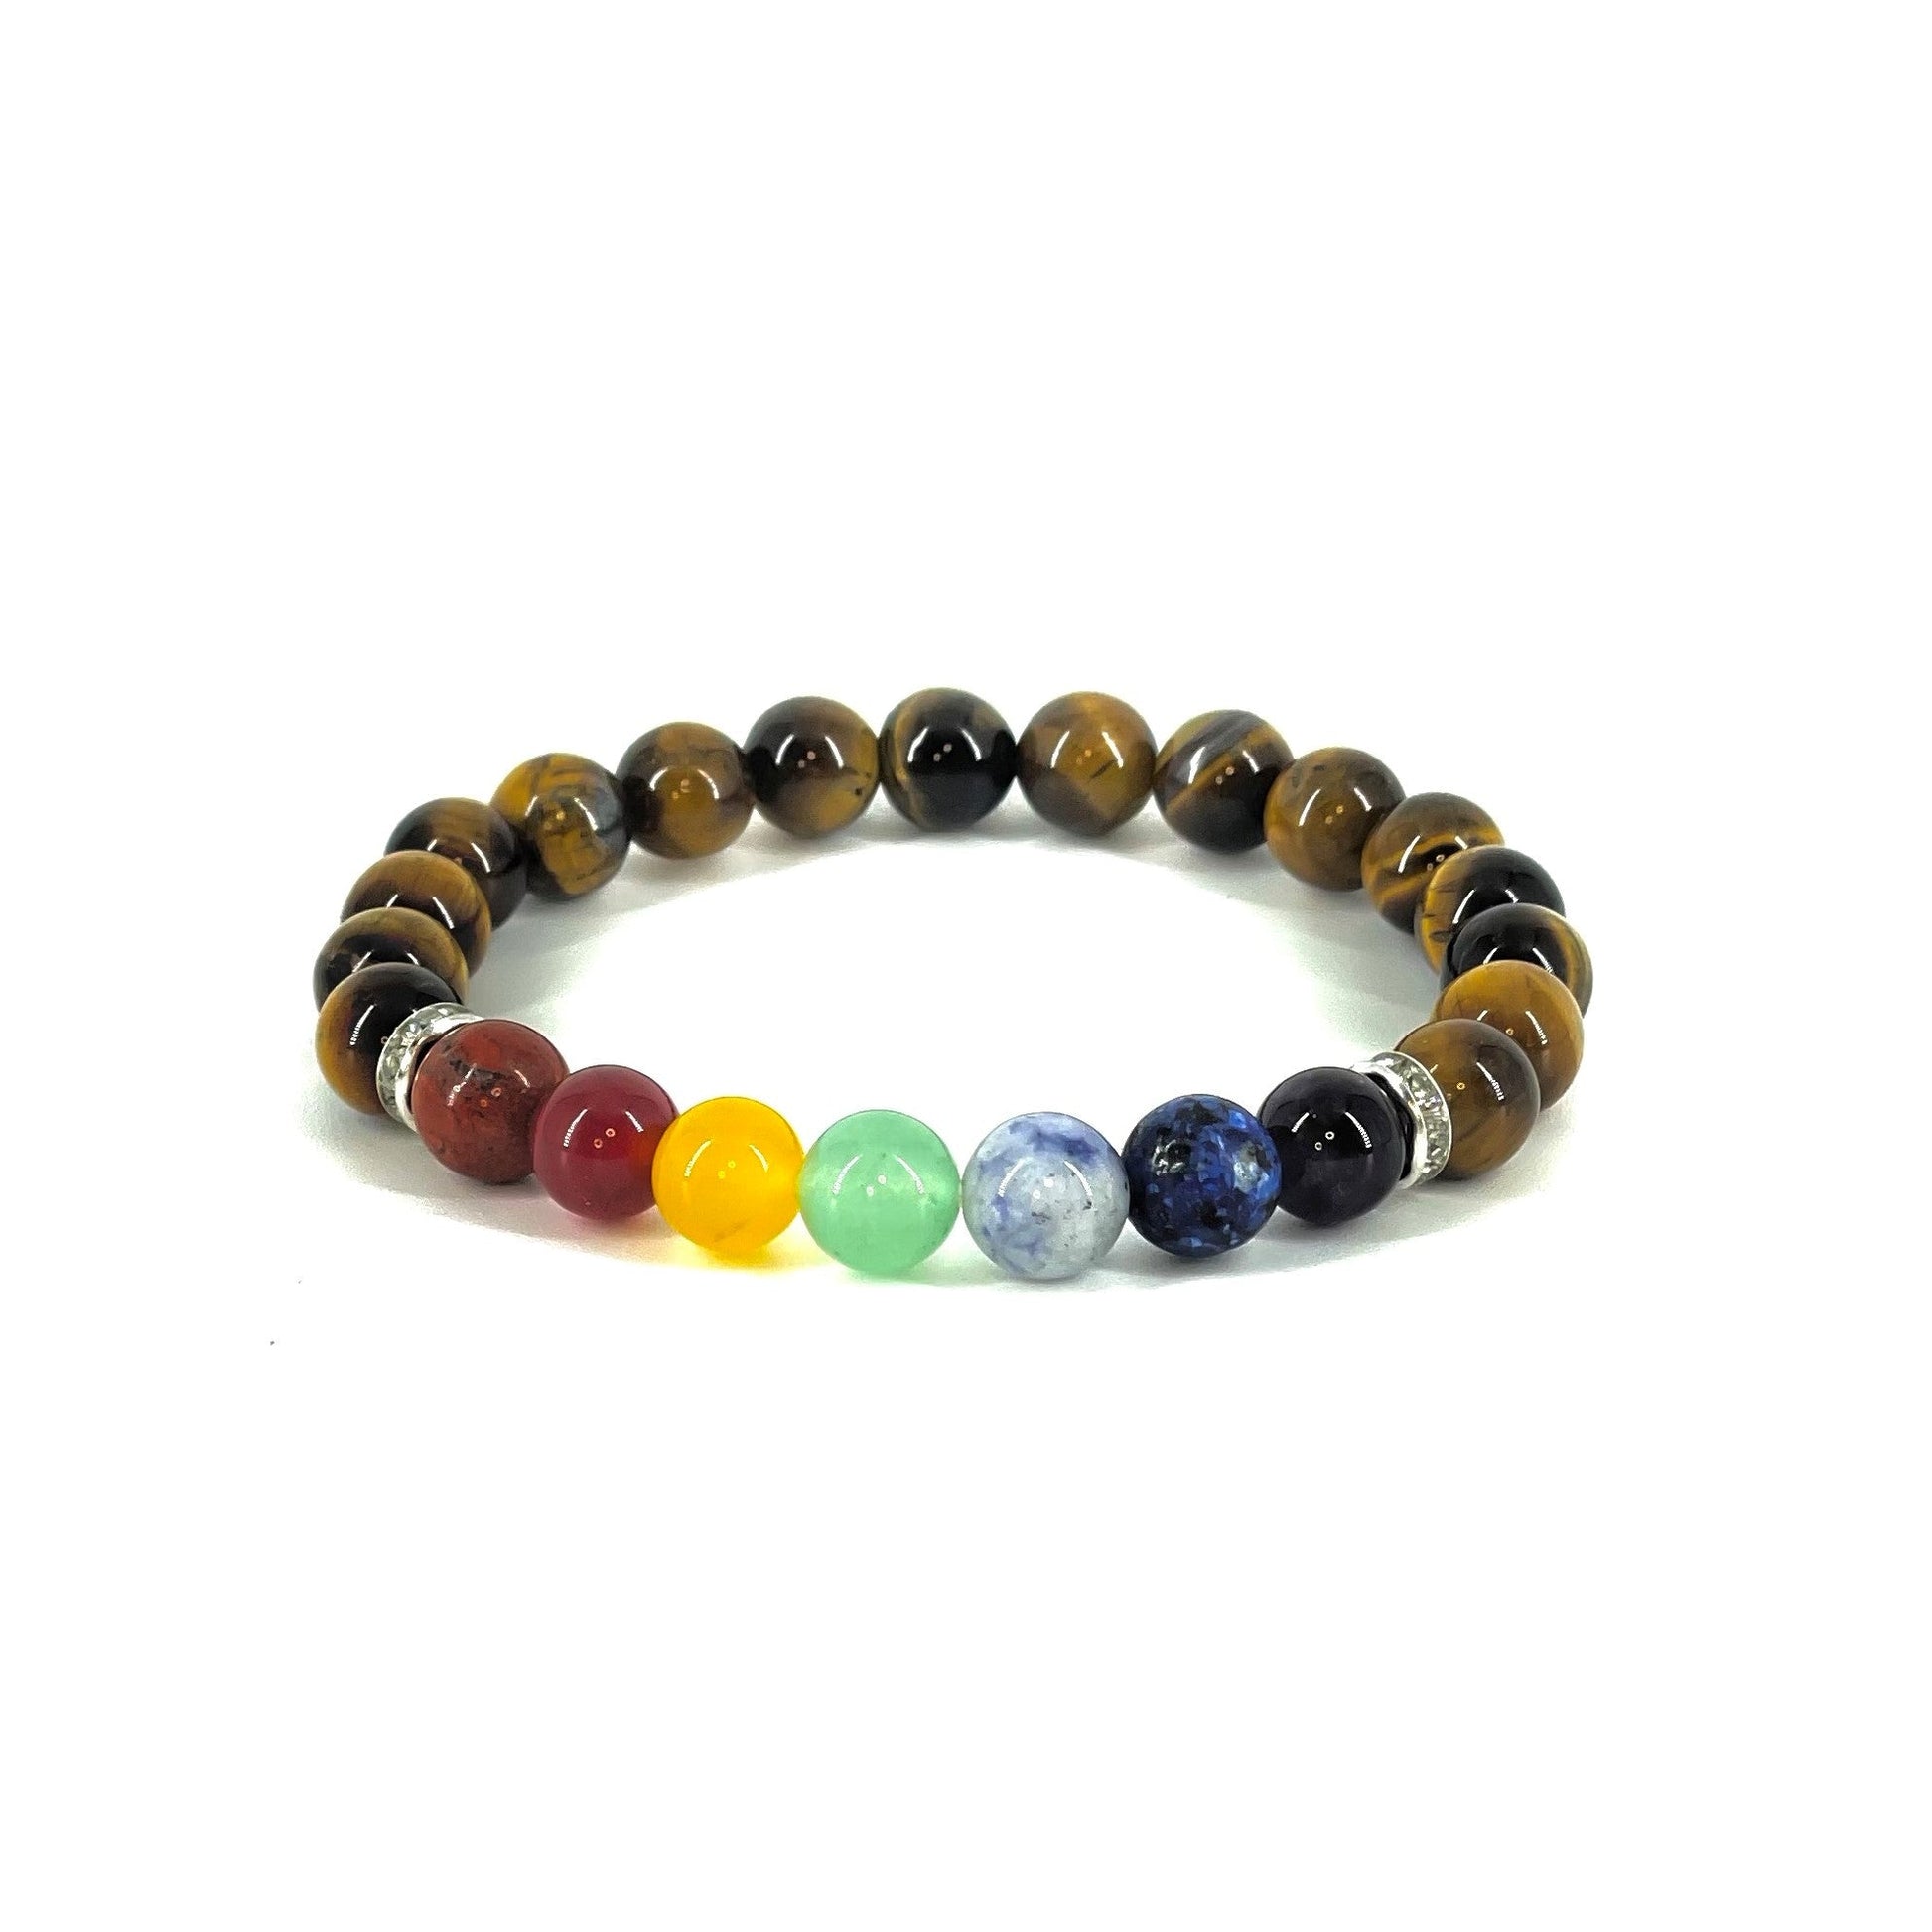 Tiger Eye with Chakra Bracelet (Bandar check new product our picture will add more) Stones Crystal Shop